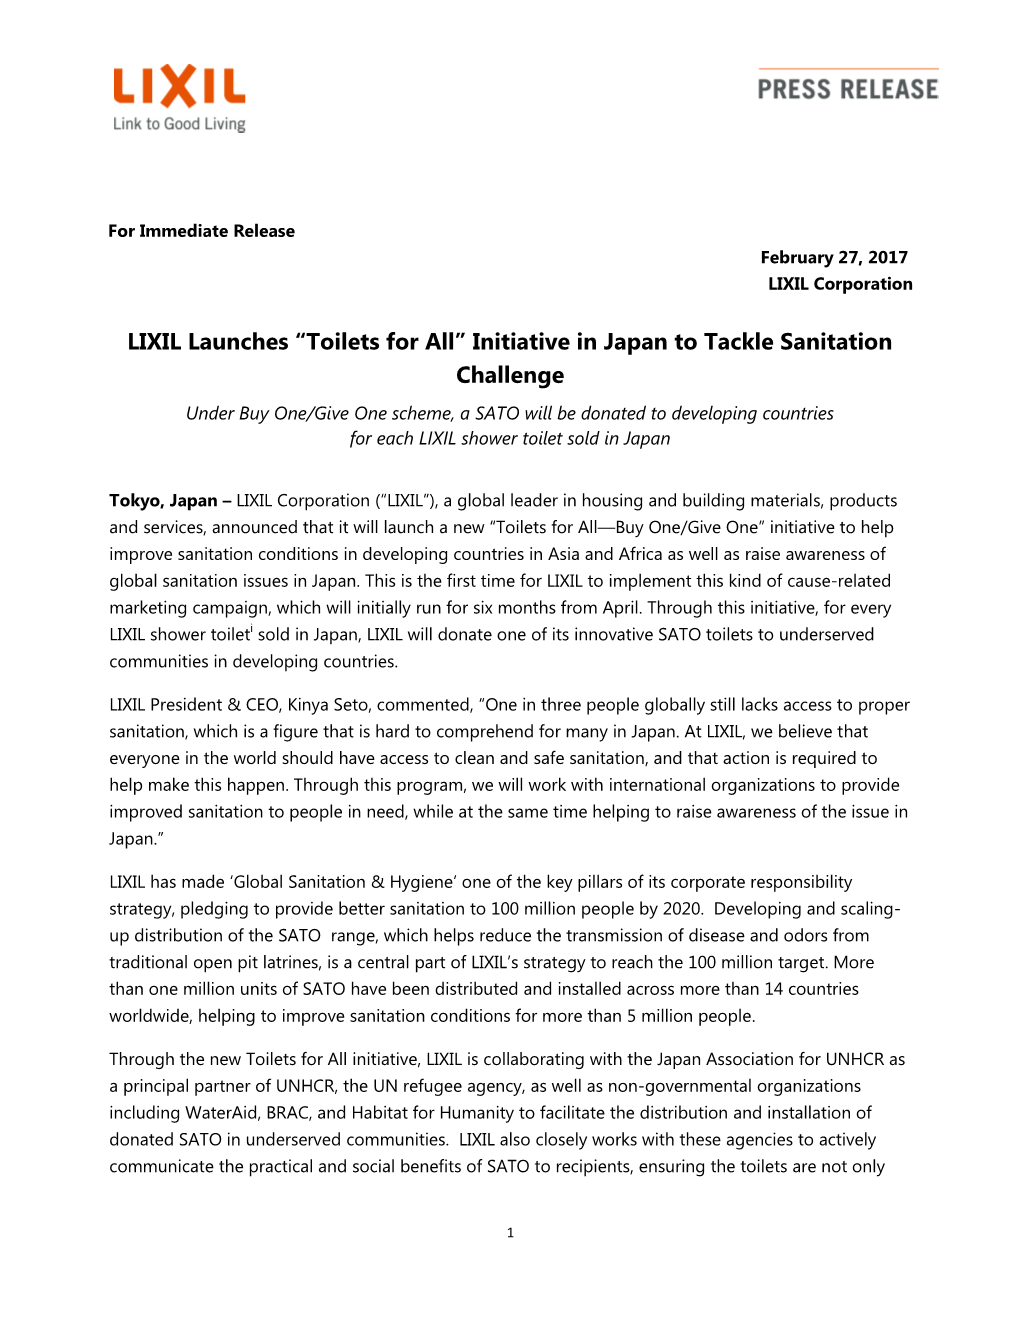 LIXIL Launches “Toilets for All” Initiative in Japan to Tackle